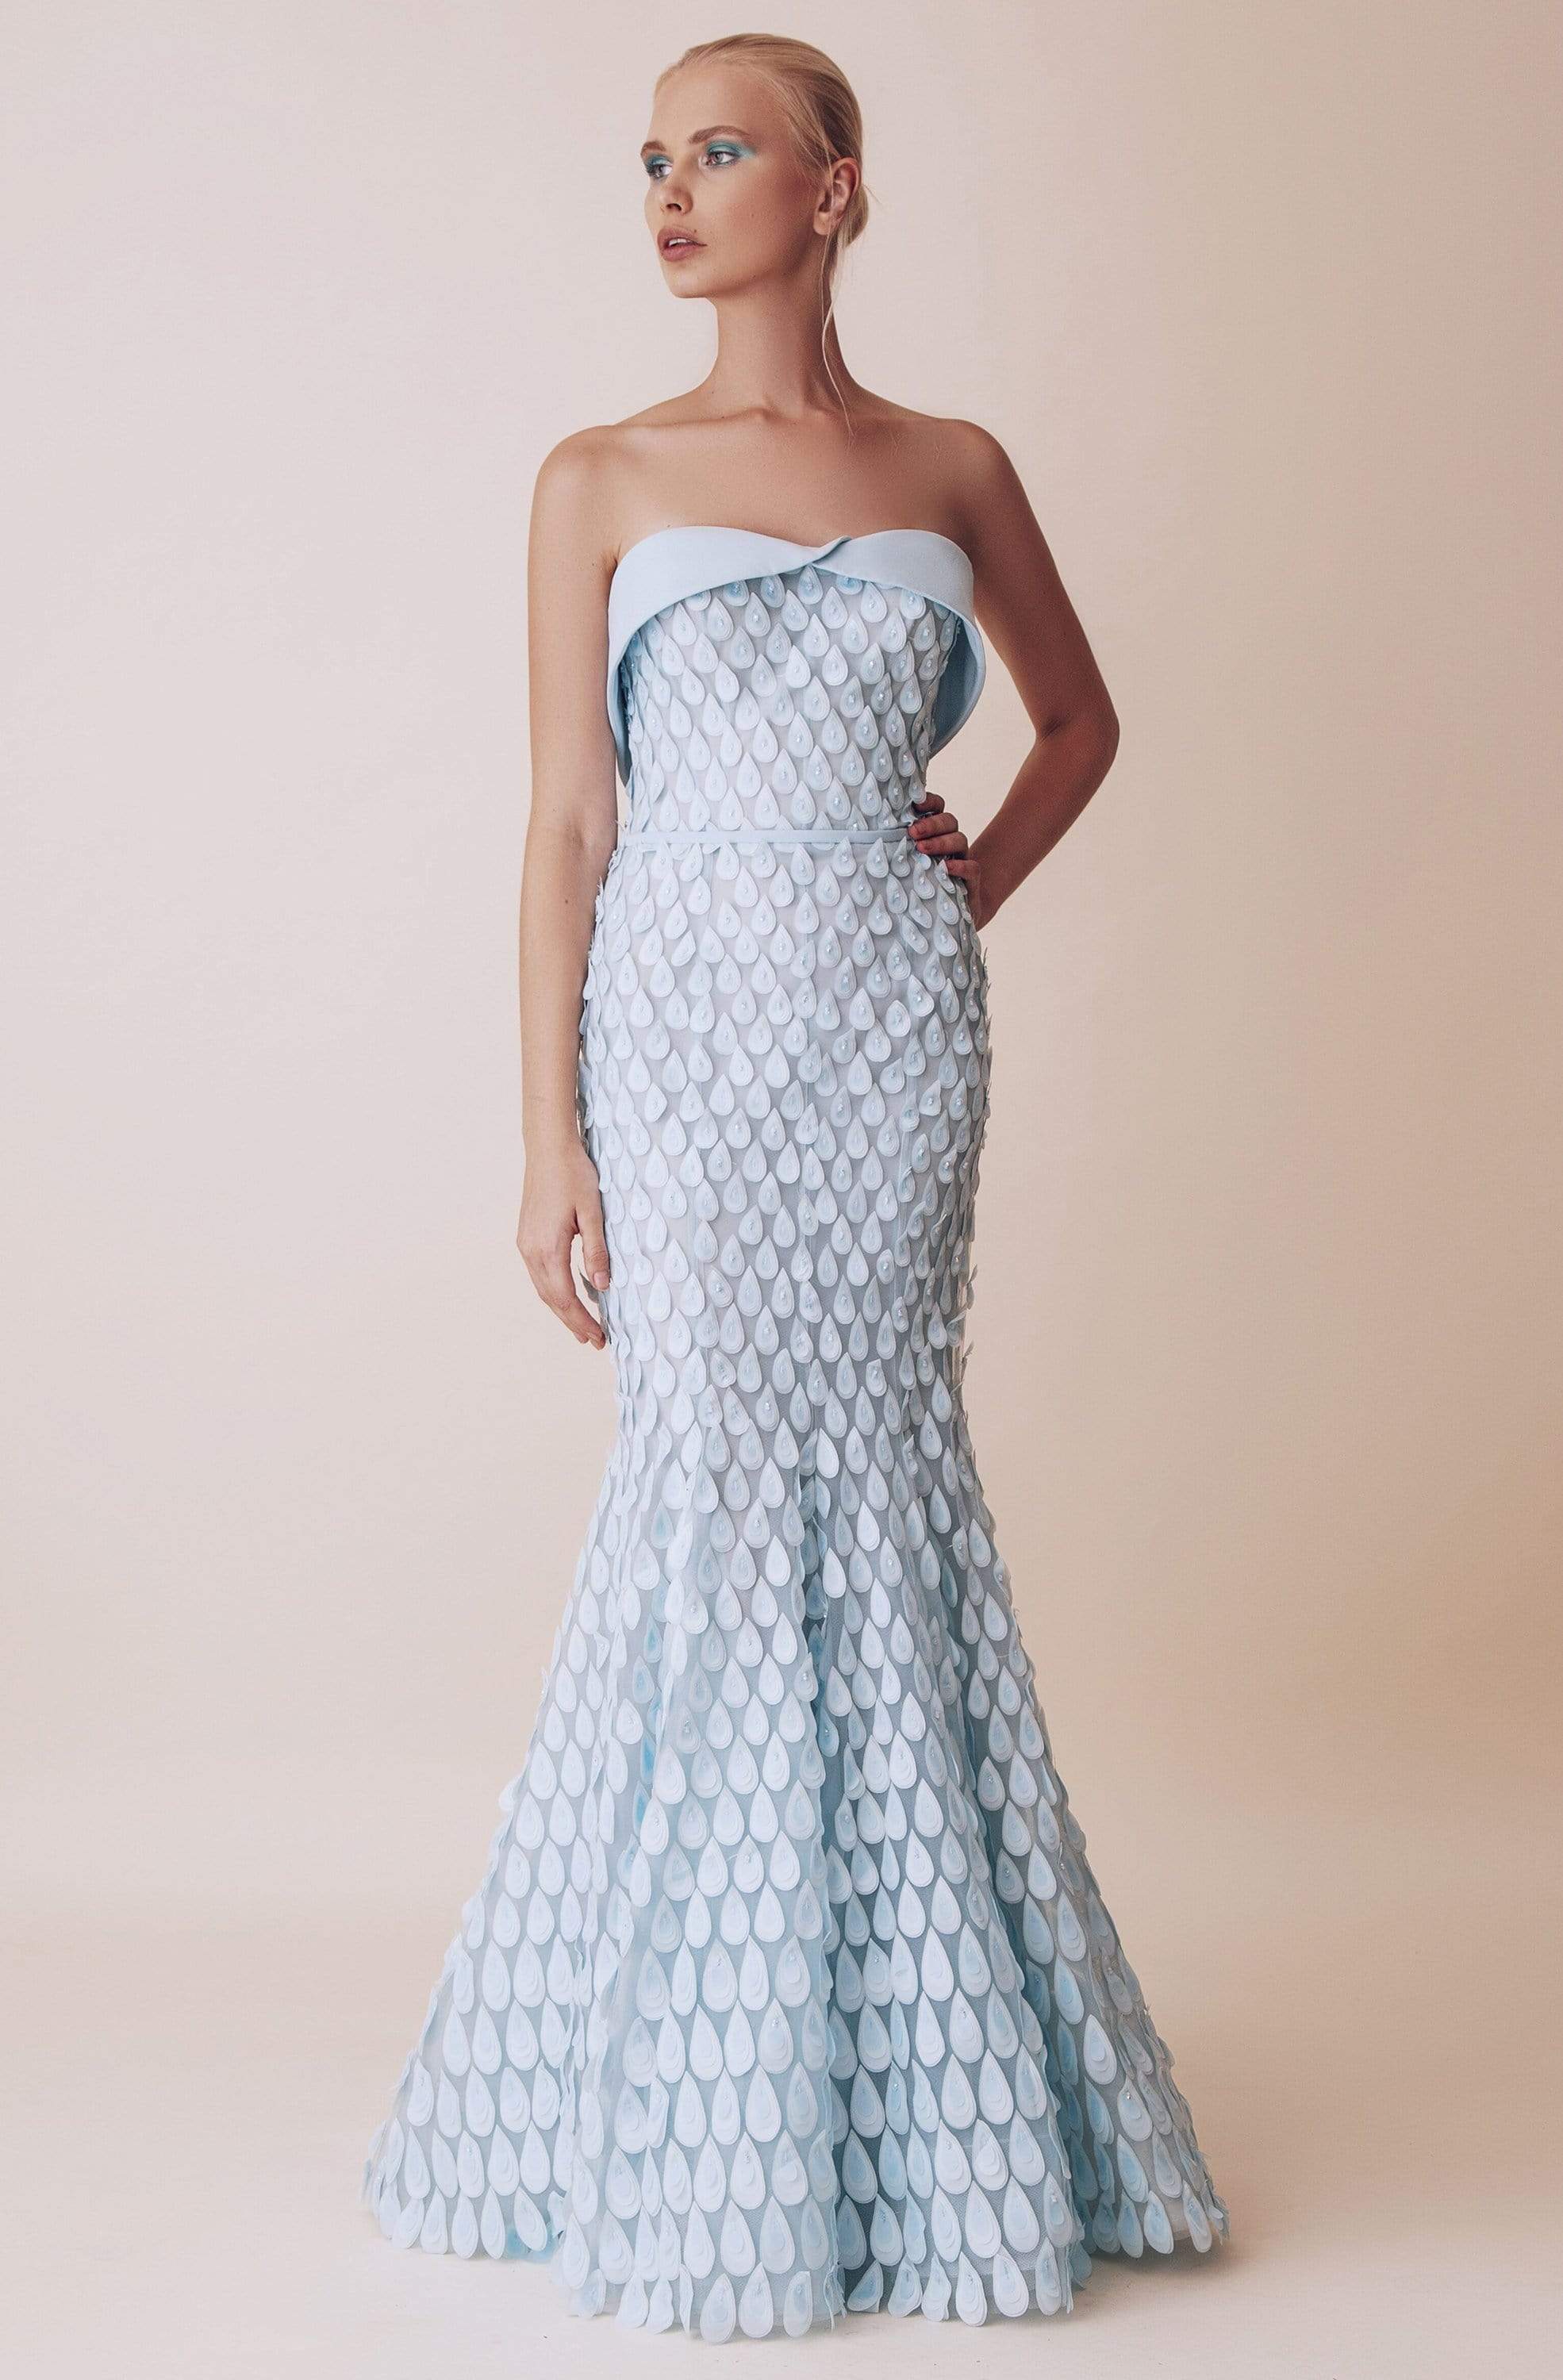 Image of Gatti Nolli Couture - OP-4954 Teardrop Strapless Mermaid Evening Gown